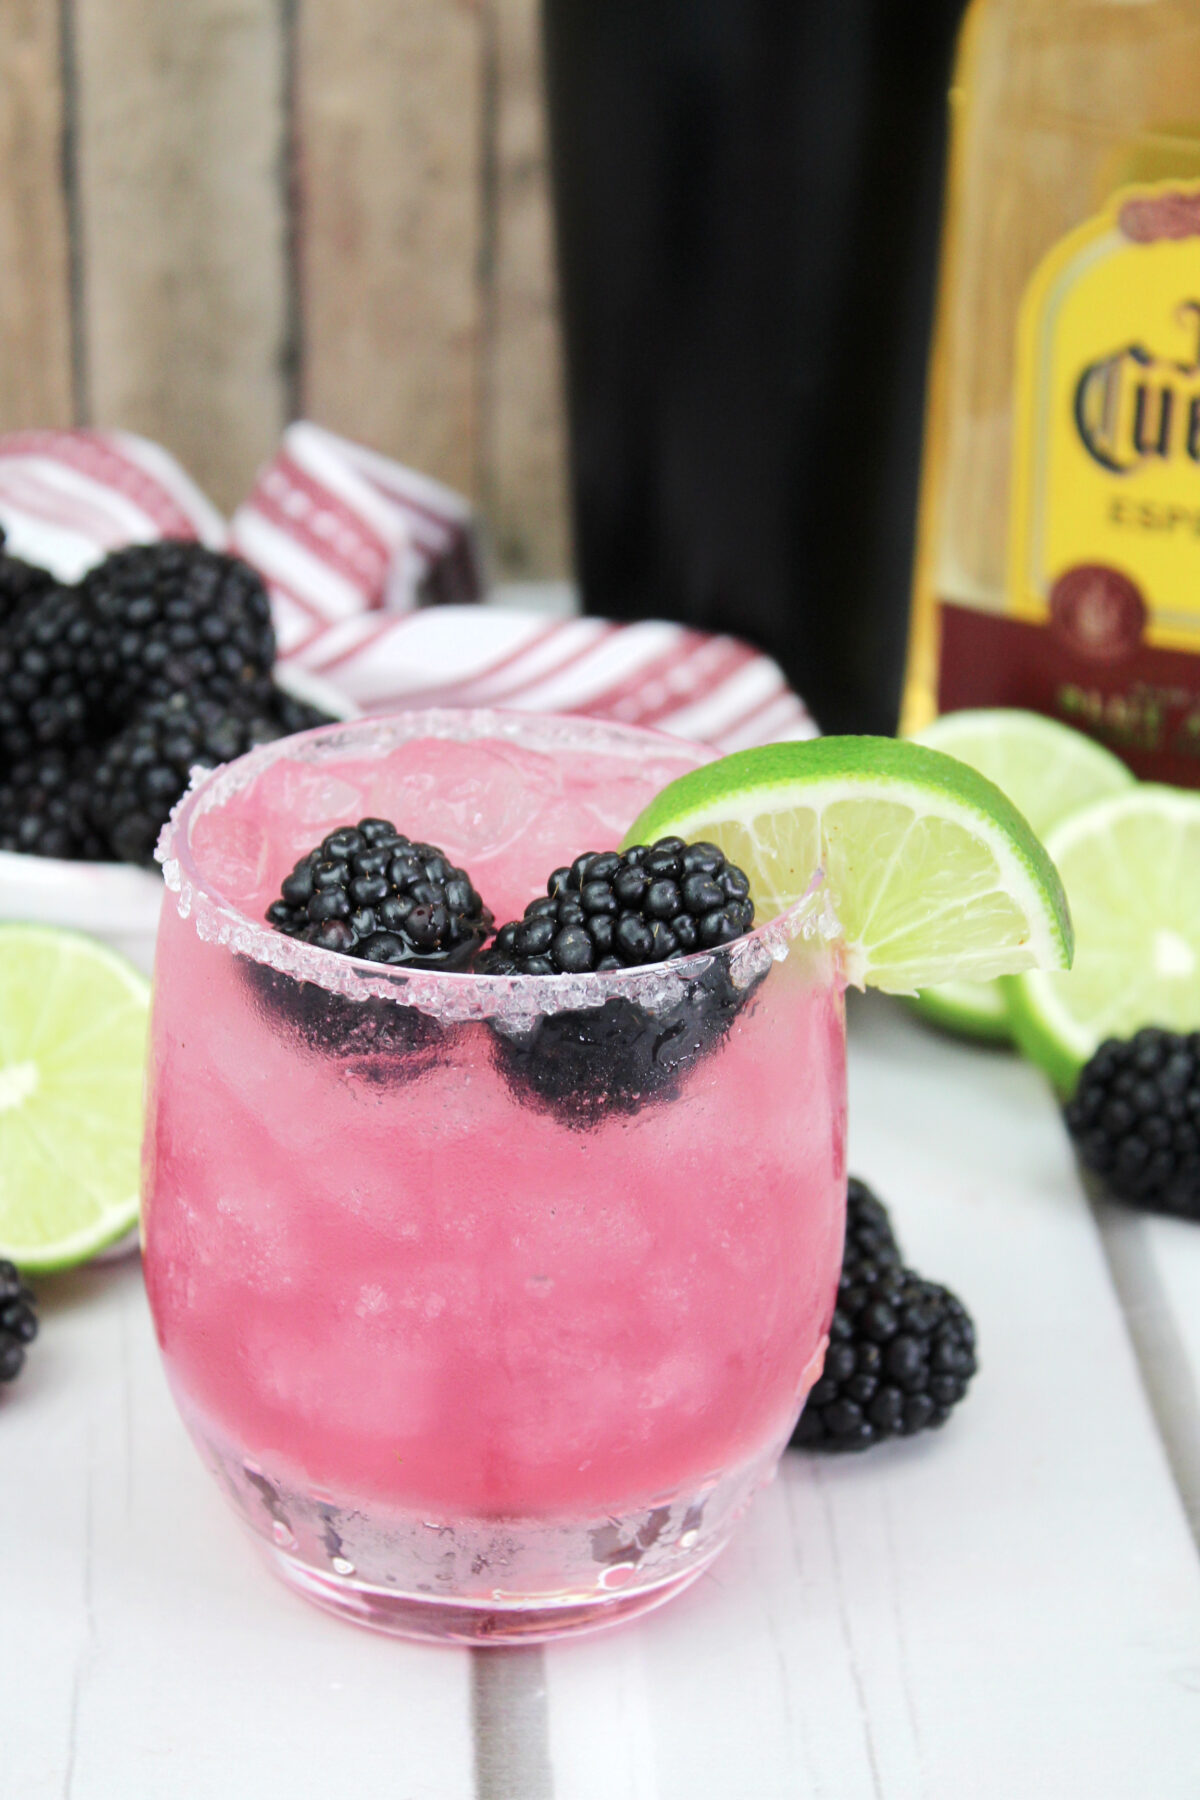 Surprise your friends and family with a unique twist on a classic margarita by using this simple blackberry margarita recipe!